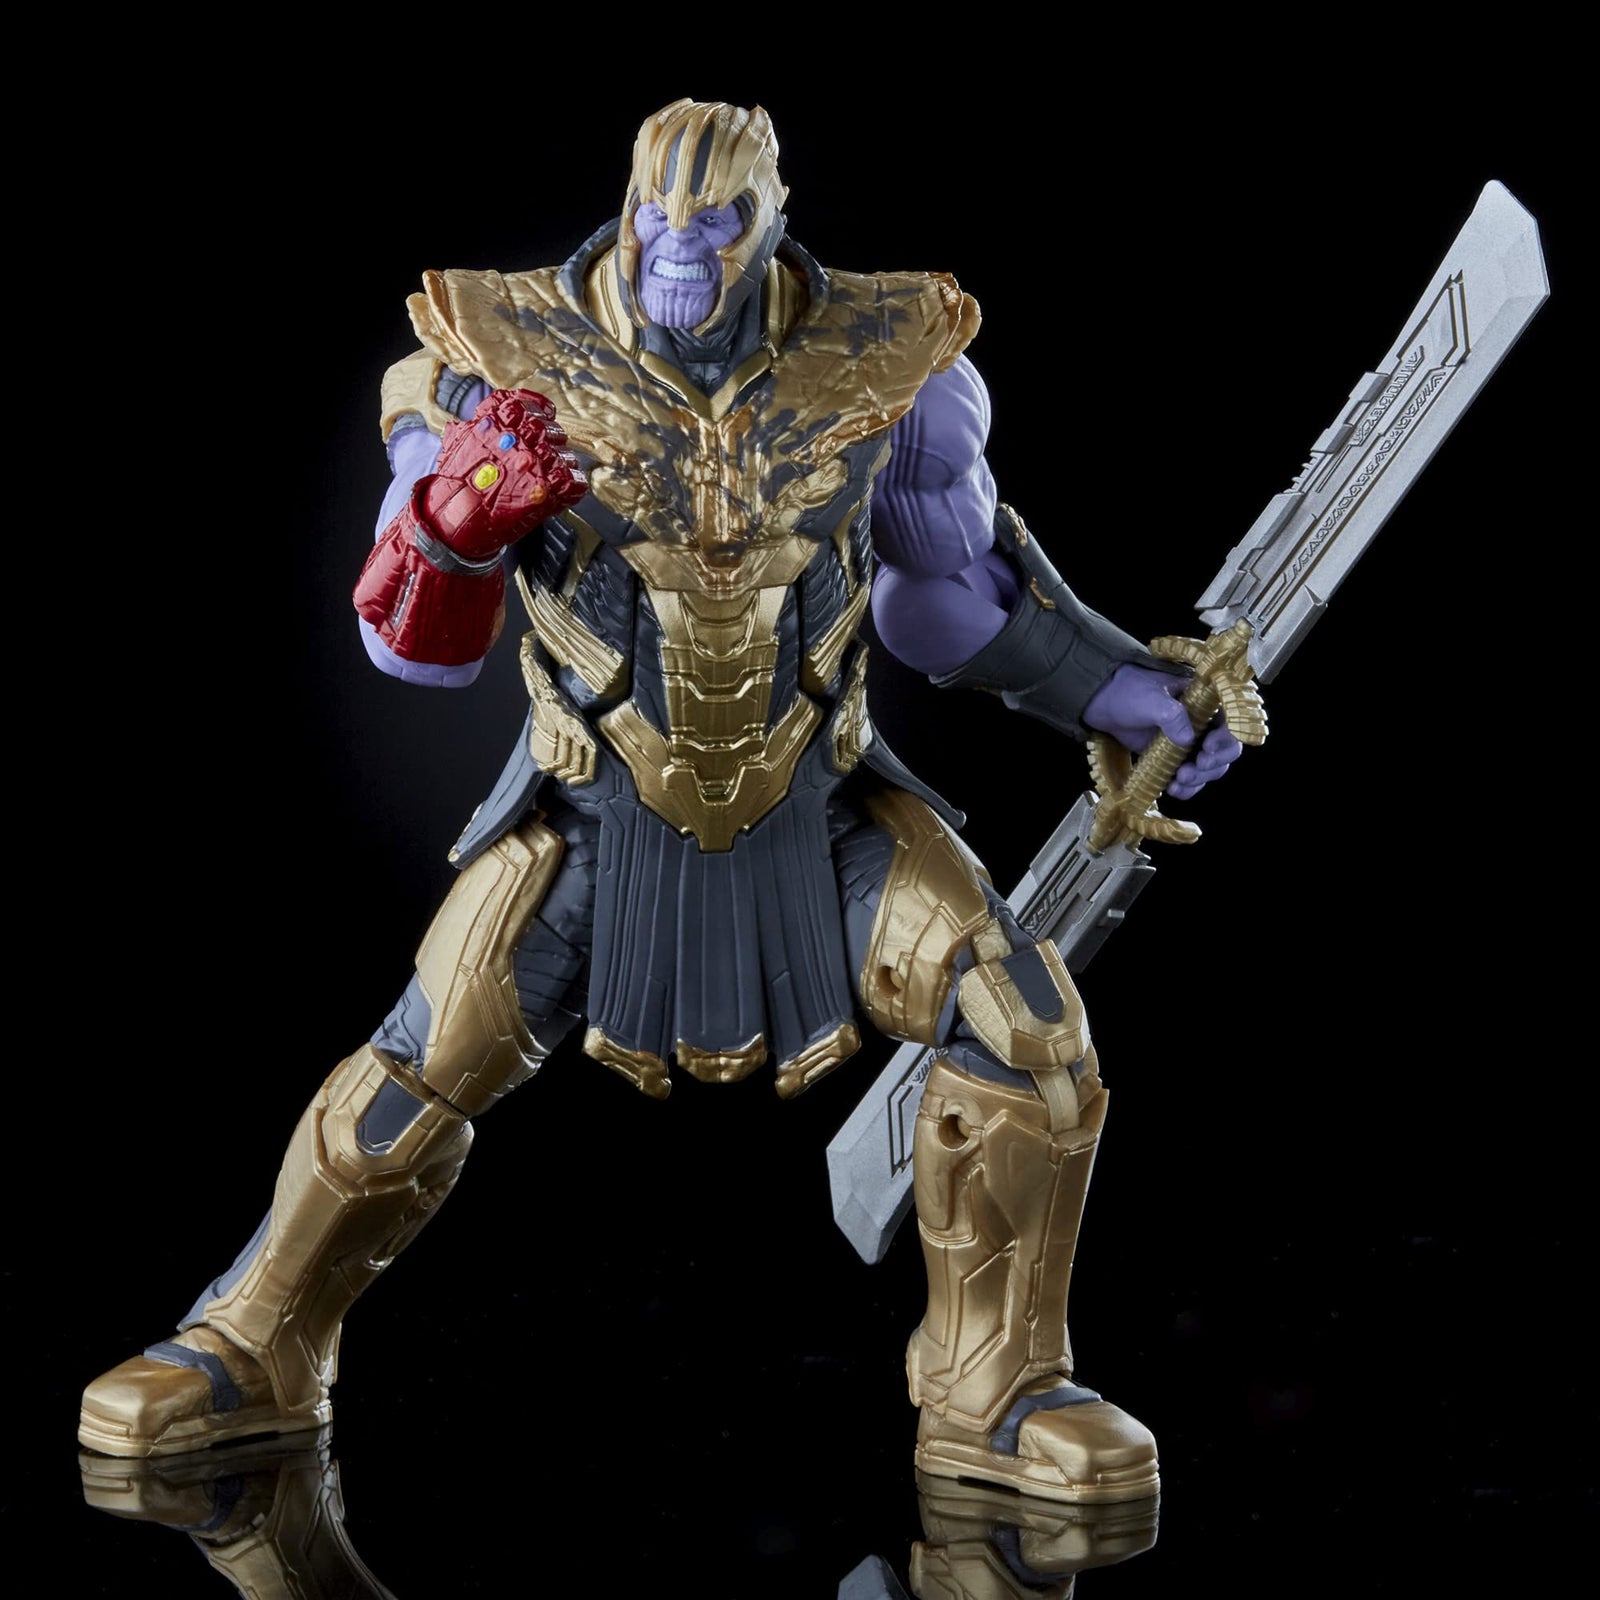 Marvel Hasbro Legends Series 6-inch Scale Action Figure 2-Pack Toy Iron Man Mark 85 vs. Thanos, Infinity Saga Character, Premium Design, 2 Figures and 8 Accessories